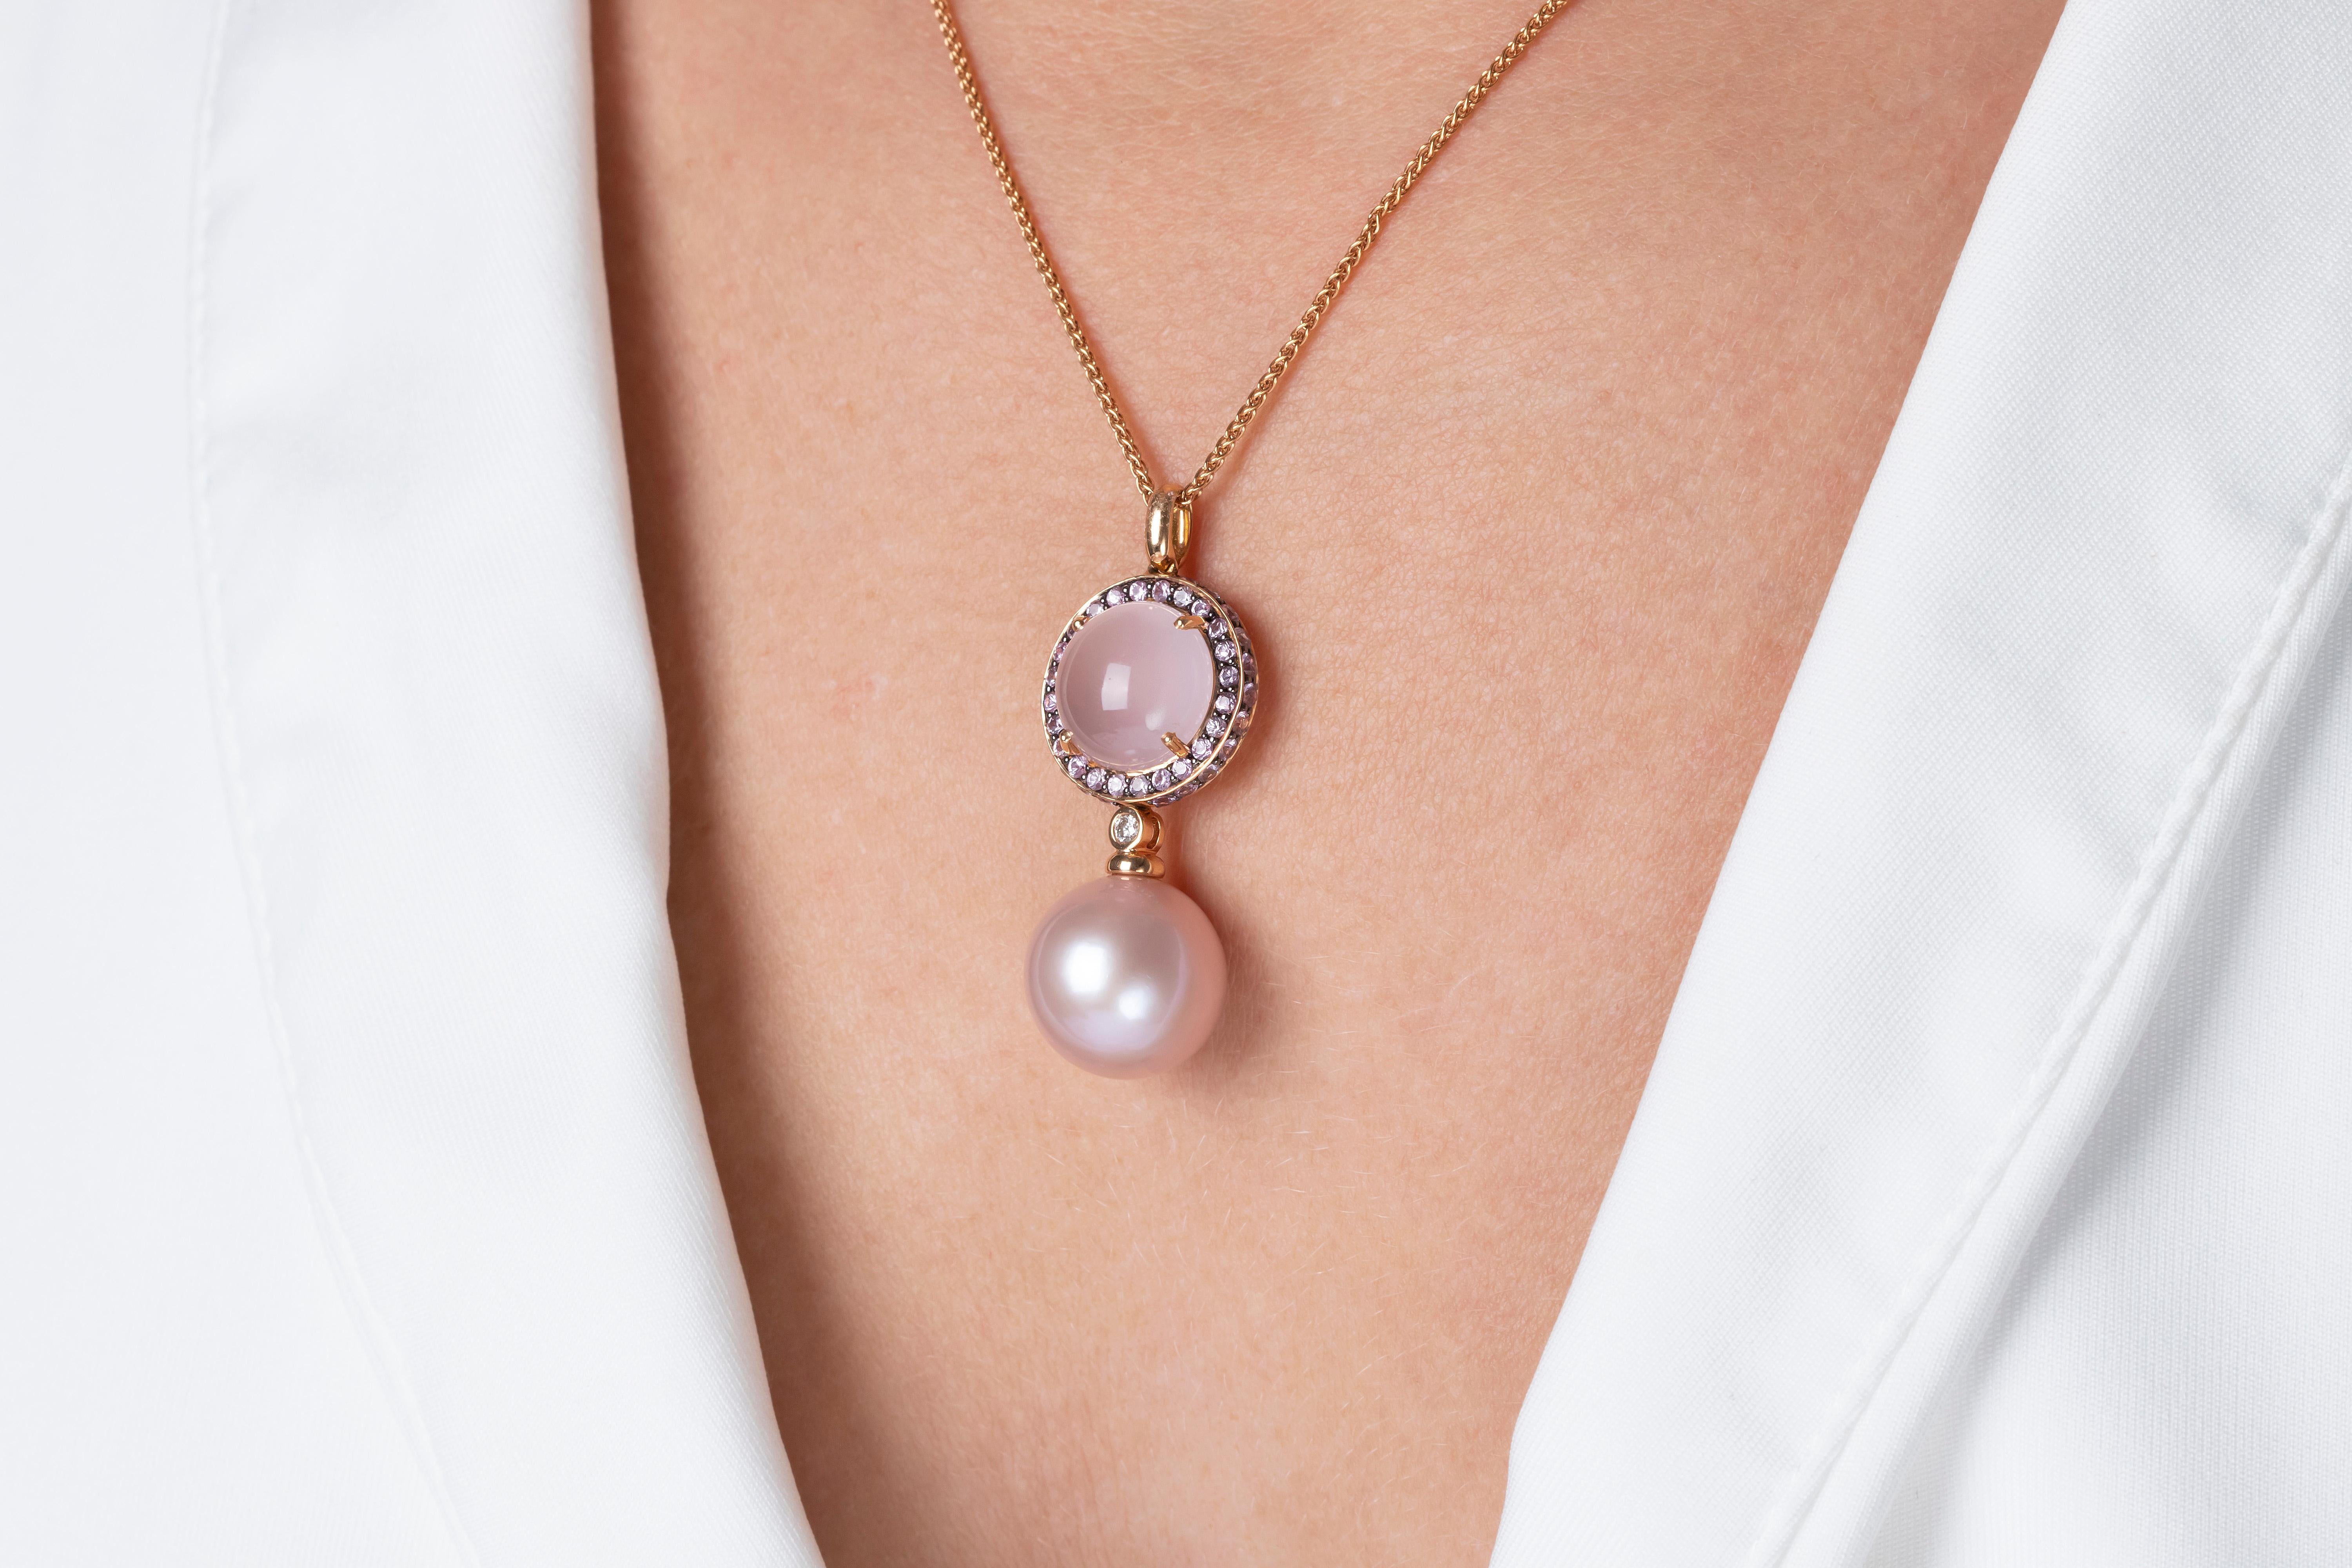 A feminine delight by Yoko London, this pretty pendant features tastefully combined shades of rose coloured gems and 18K gold in a striking design which is sure to be noticed whichever way you choose to style it. The pendant is secured to with a